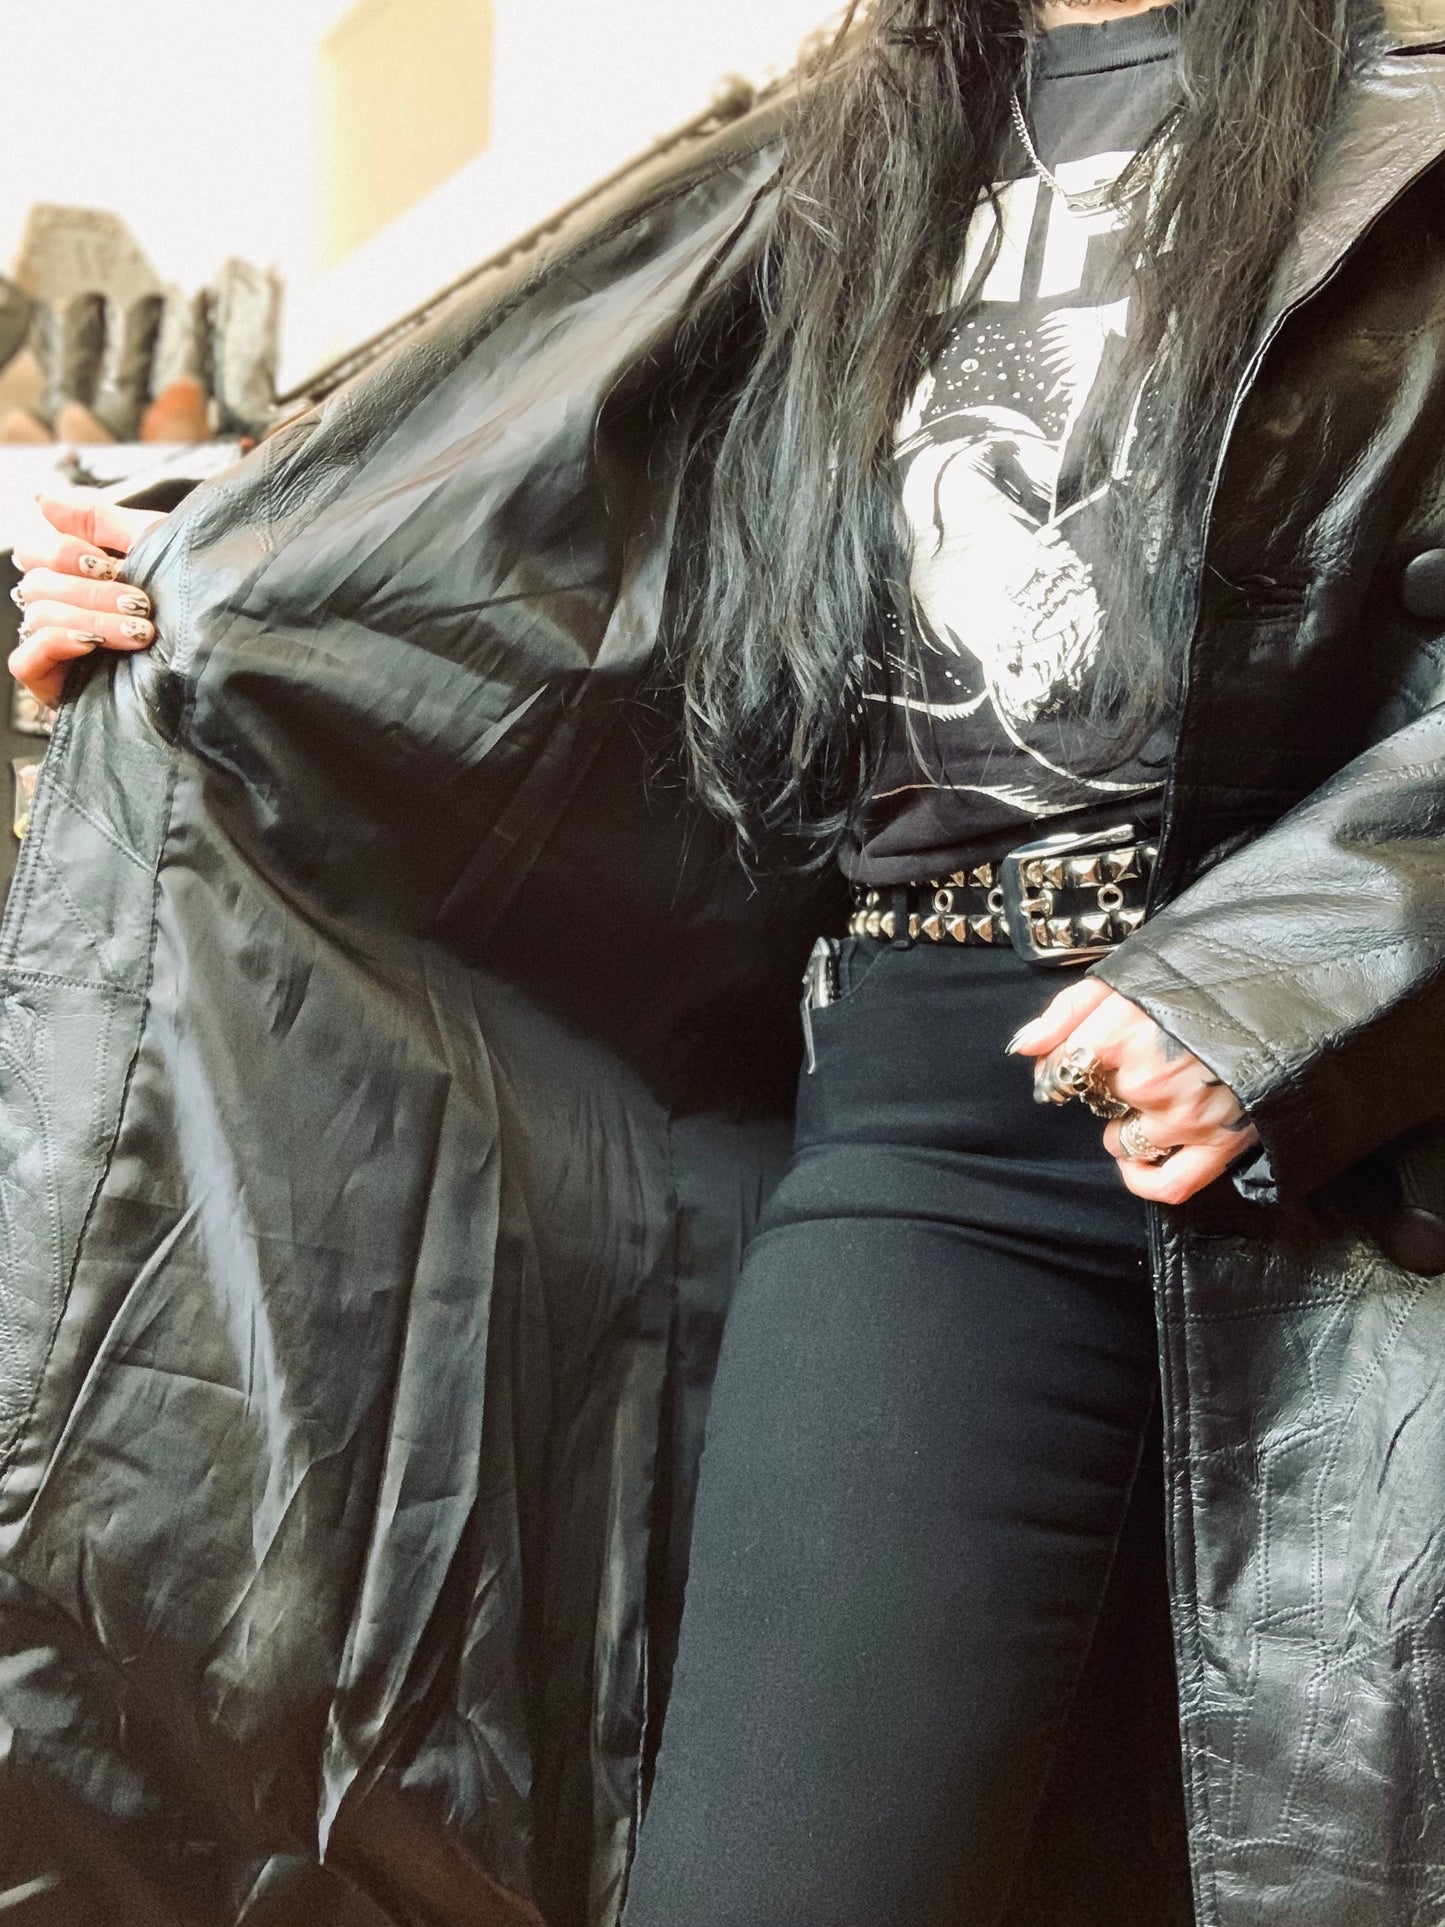 Vintage Black Leather Double-Breasted Patchwork Coat